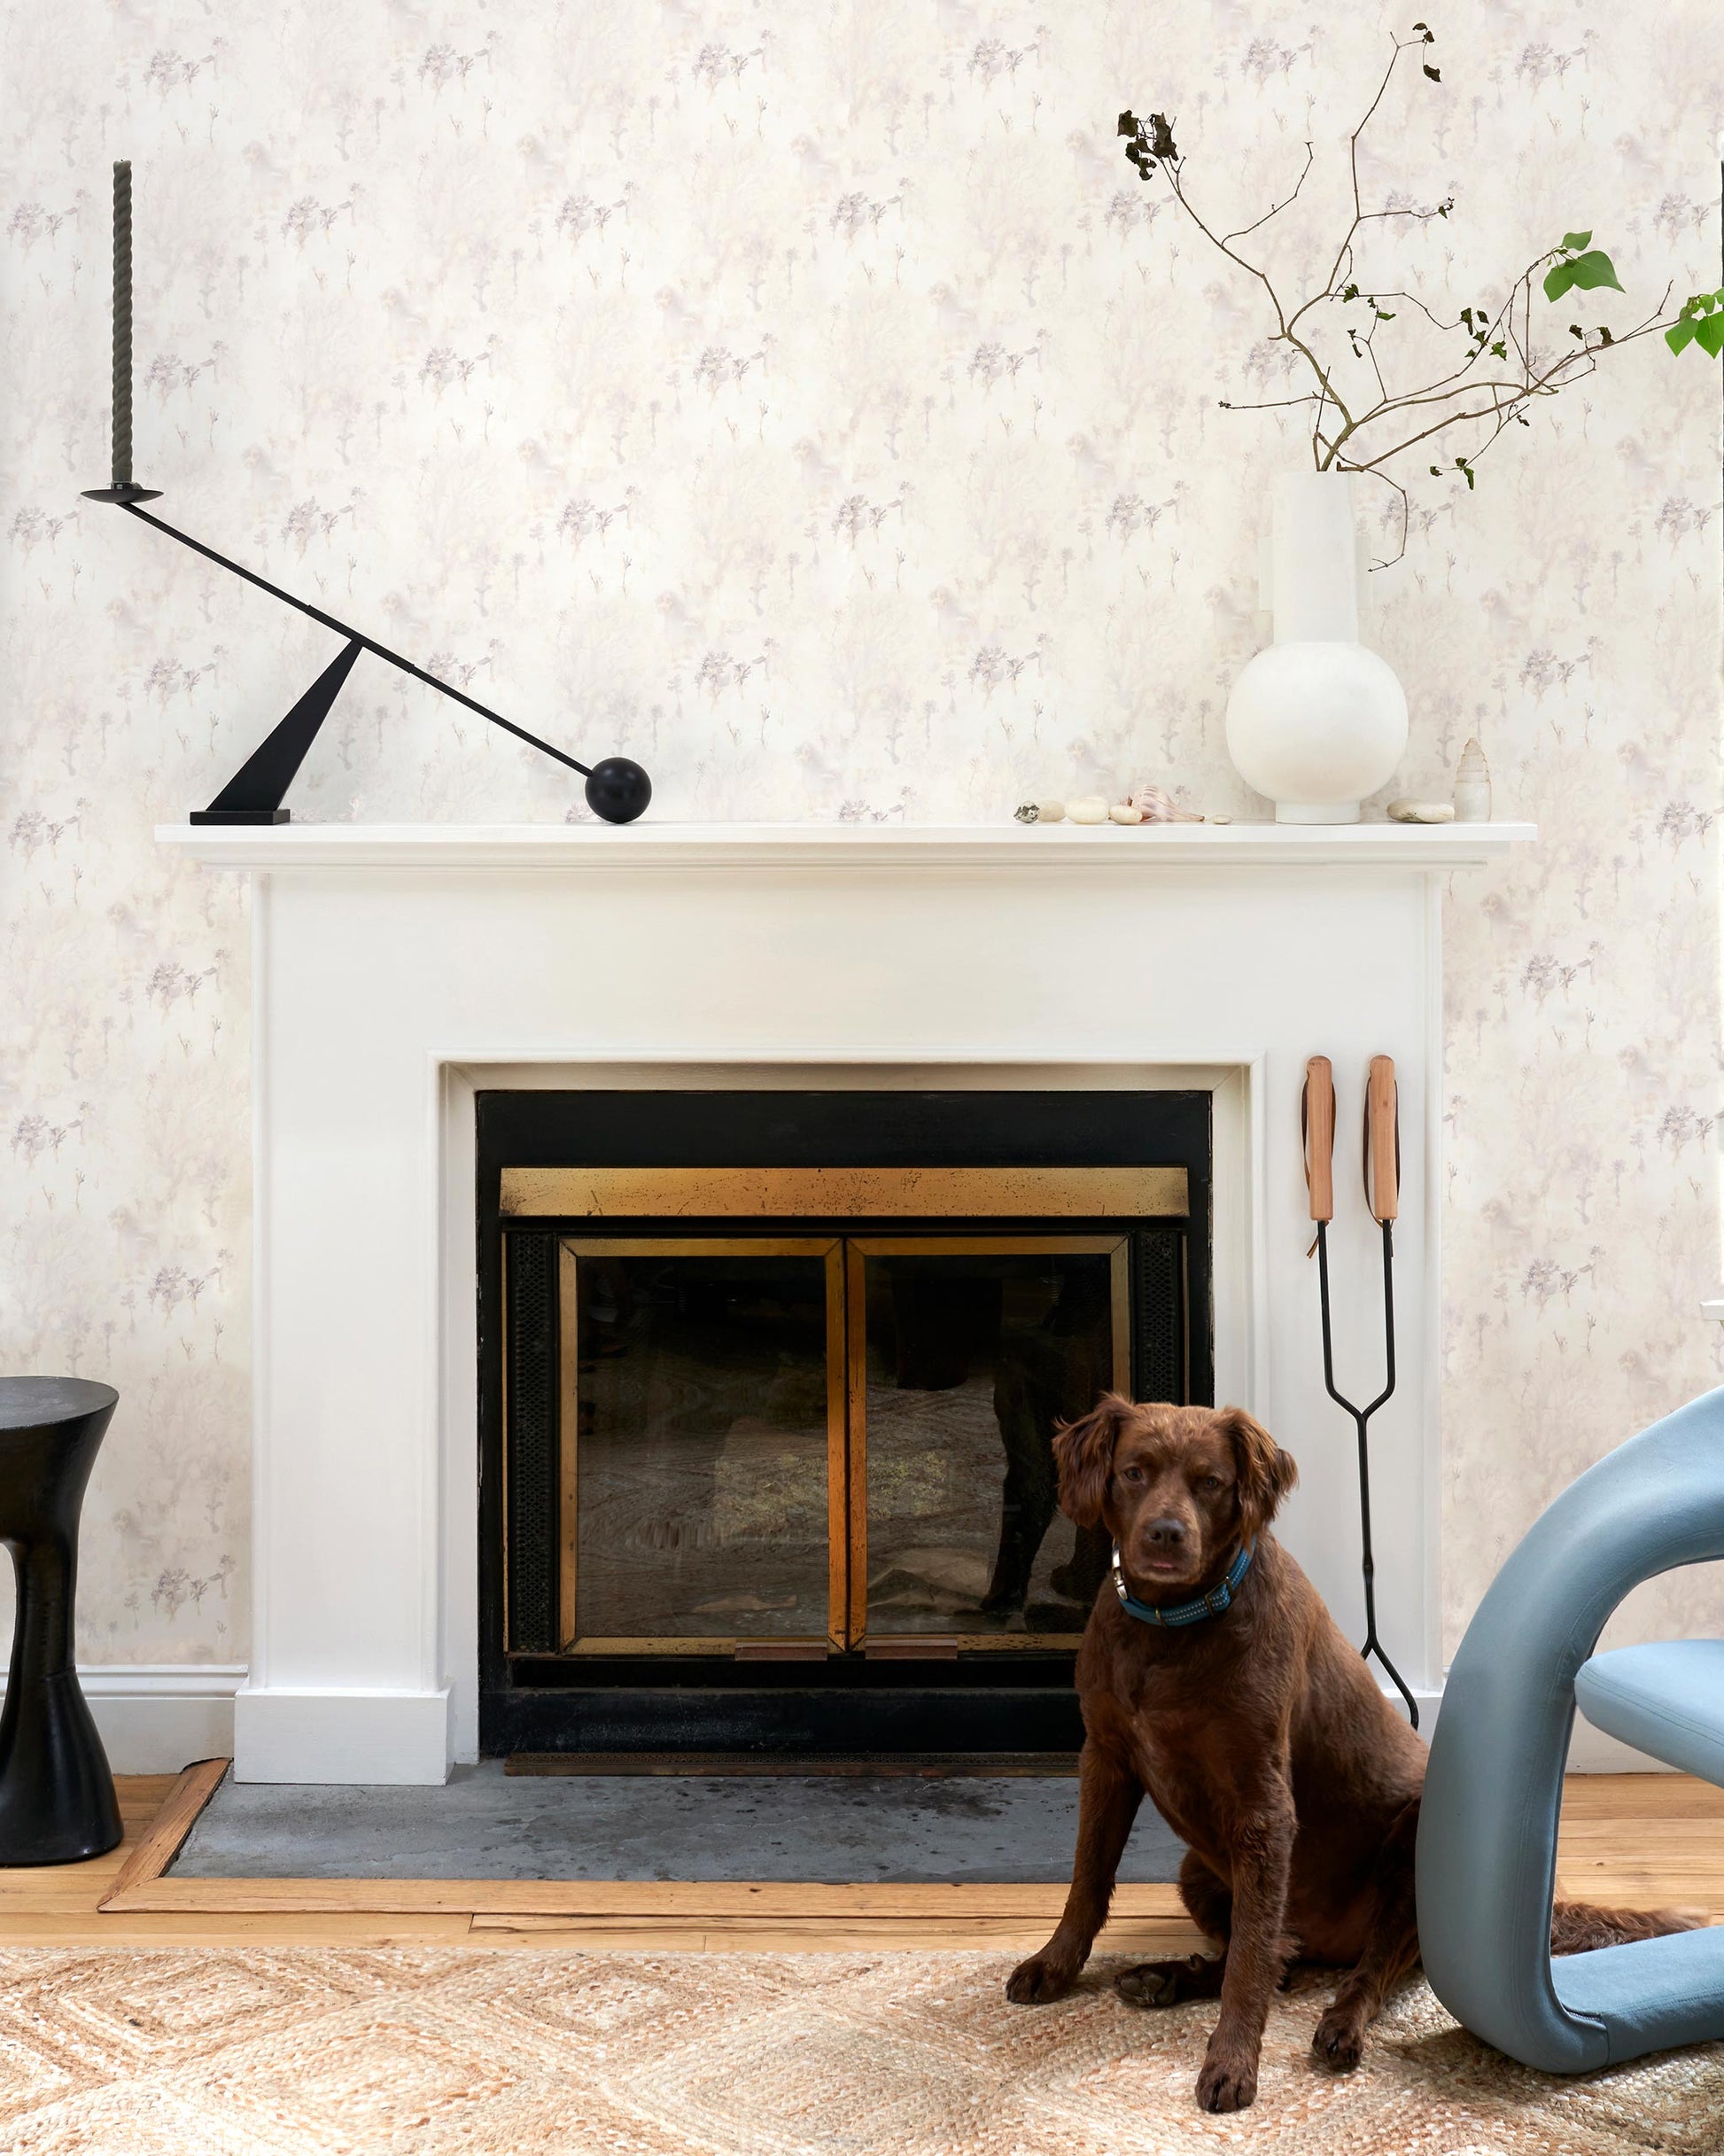 A dog is sitting in front of a fireplace, enjoying the warmth and comfort provided by Emvasia Wallpaper Sol